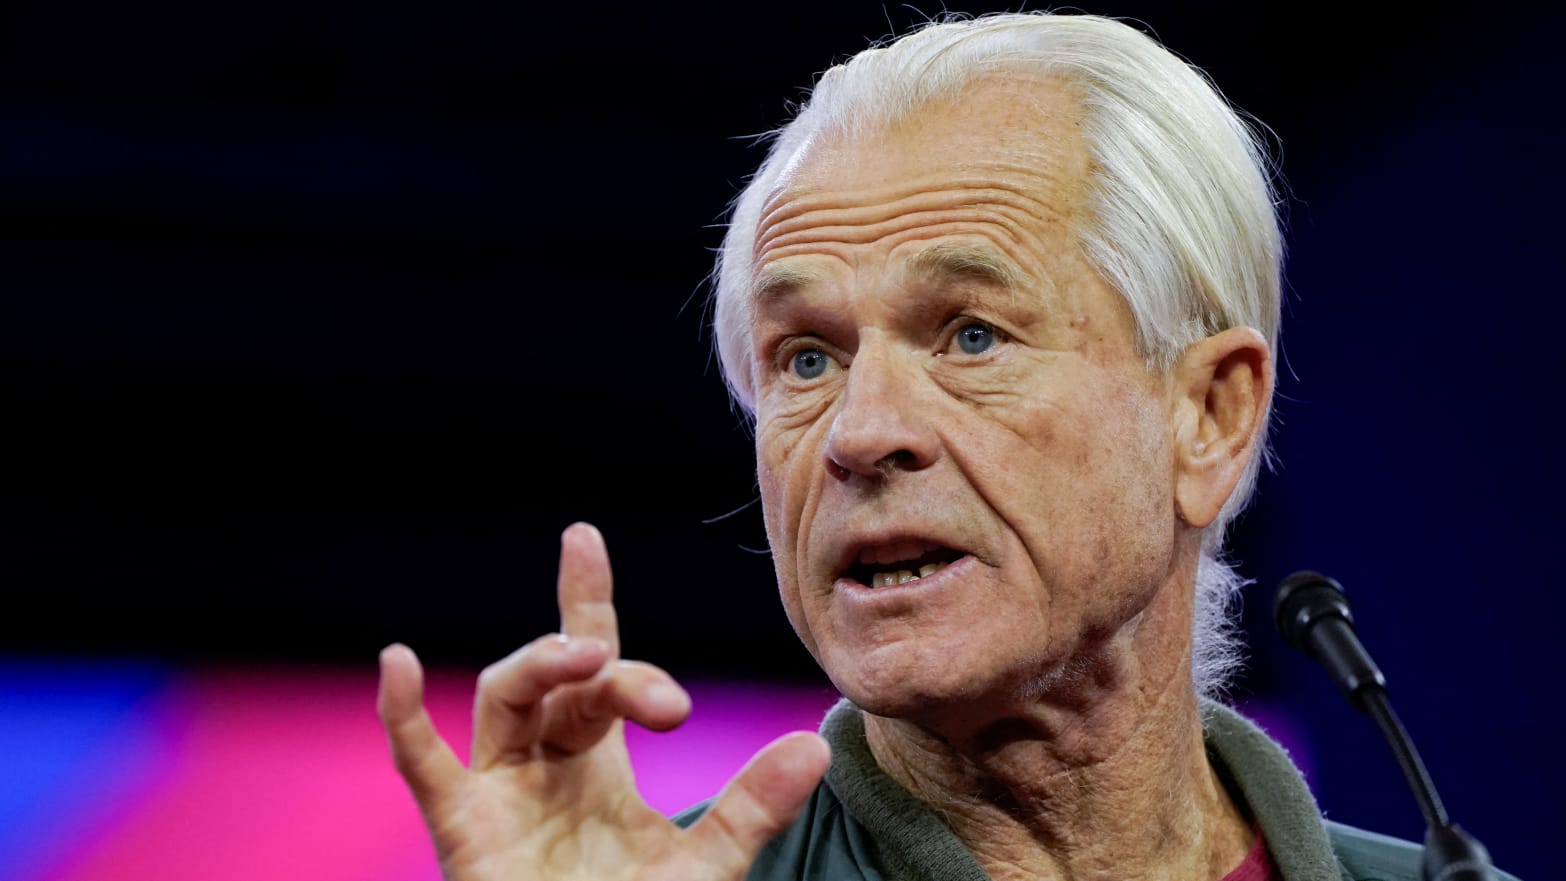 Peter Navarro speaks and raises his right hand on stage at CPAC.